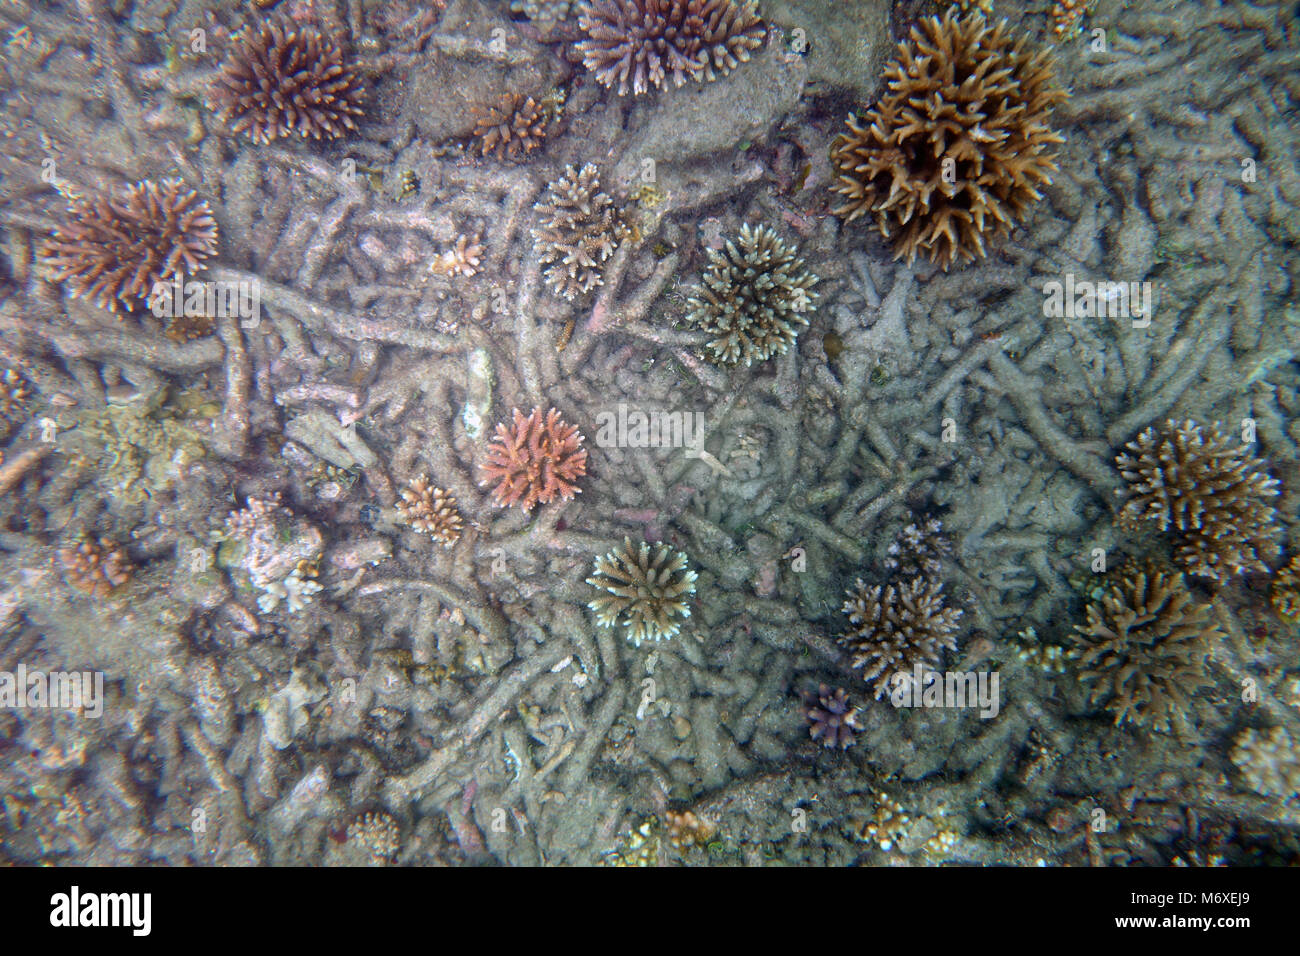 Many small recruit coral colonies amongst dead coral rubble, Fitzroy Island, Great Barrier Reef, Queensland, Australia Stock Photo